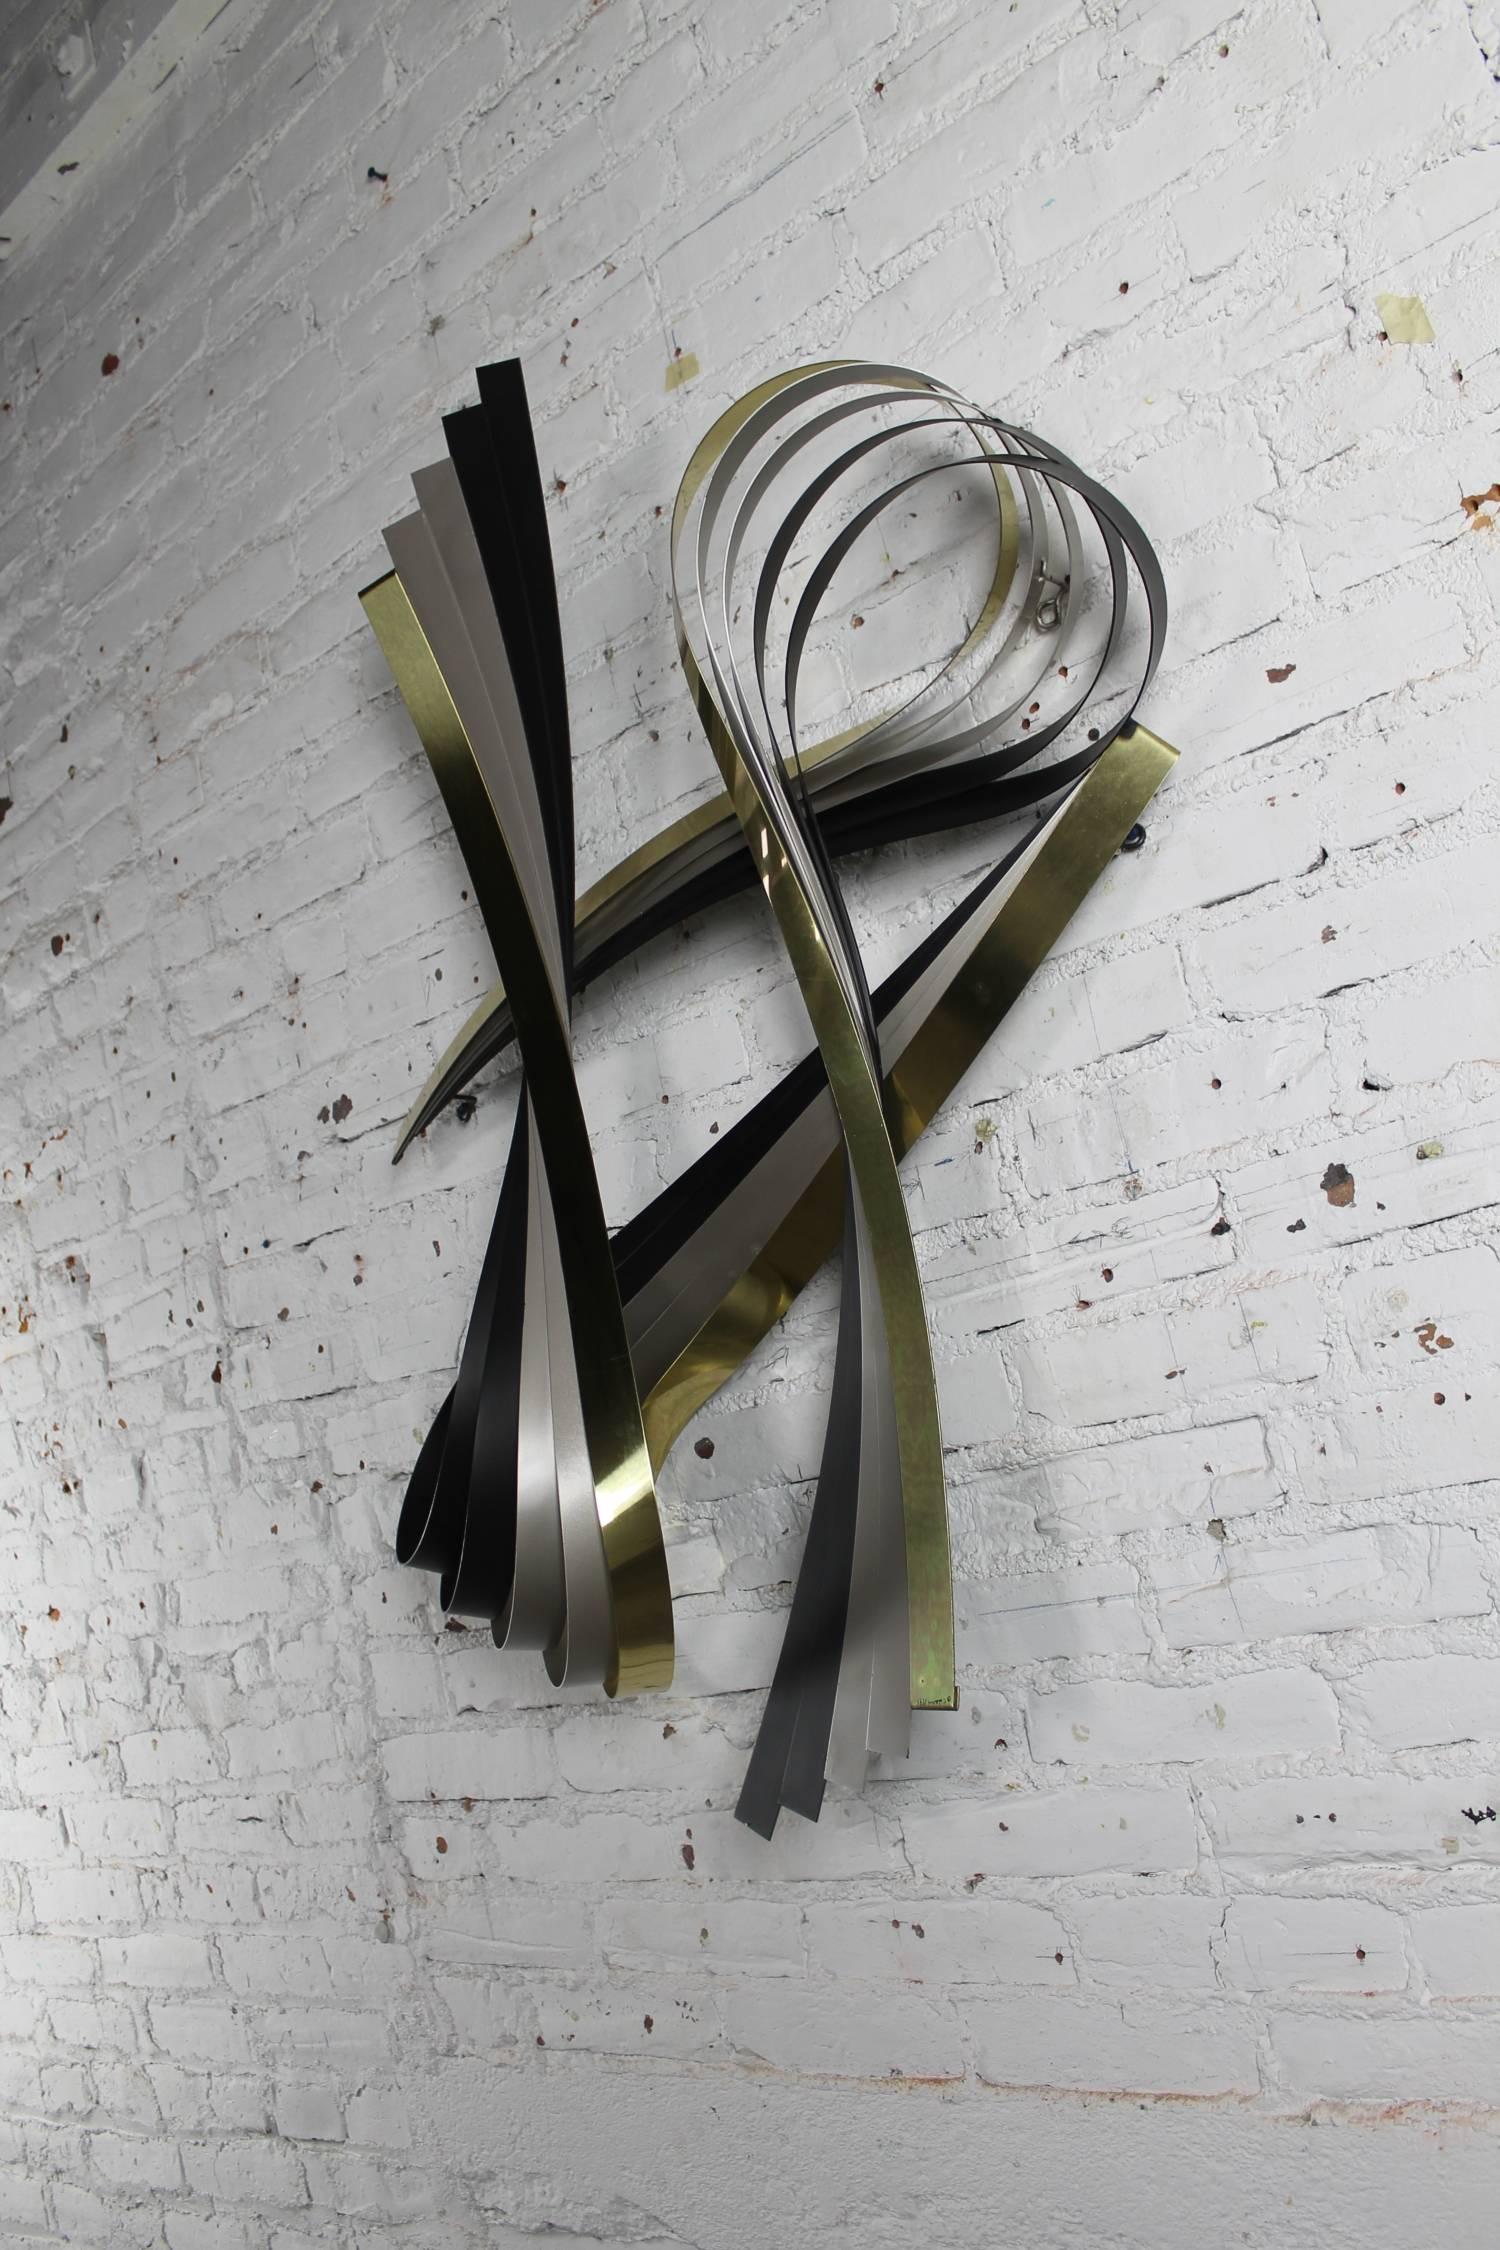 American Vintage C. Jere Ribbon Wall Sculpture in Brass-Tone Silver & Black Painted Metal